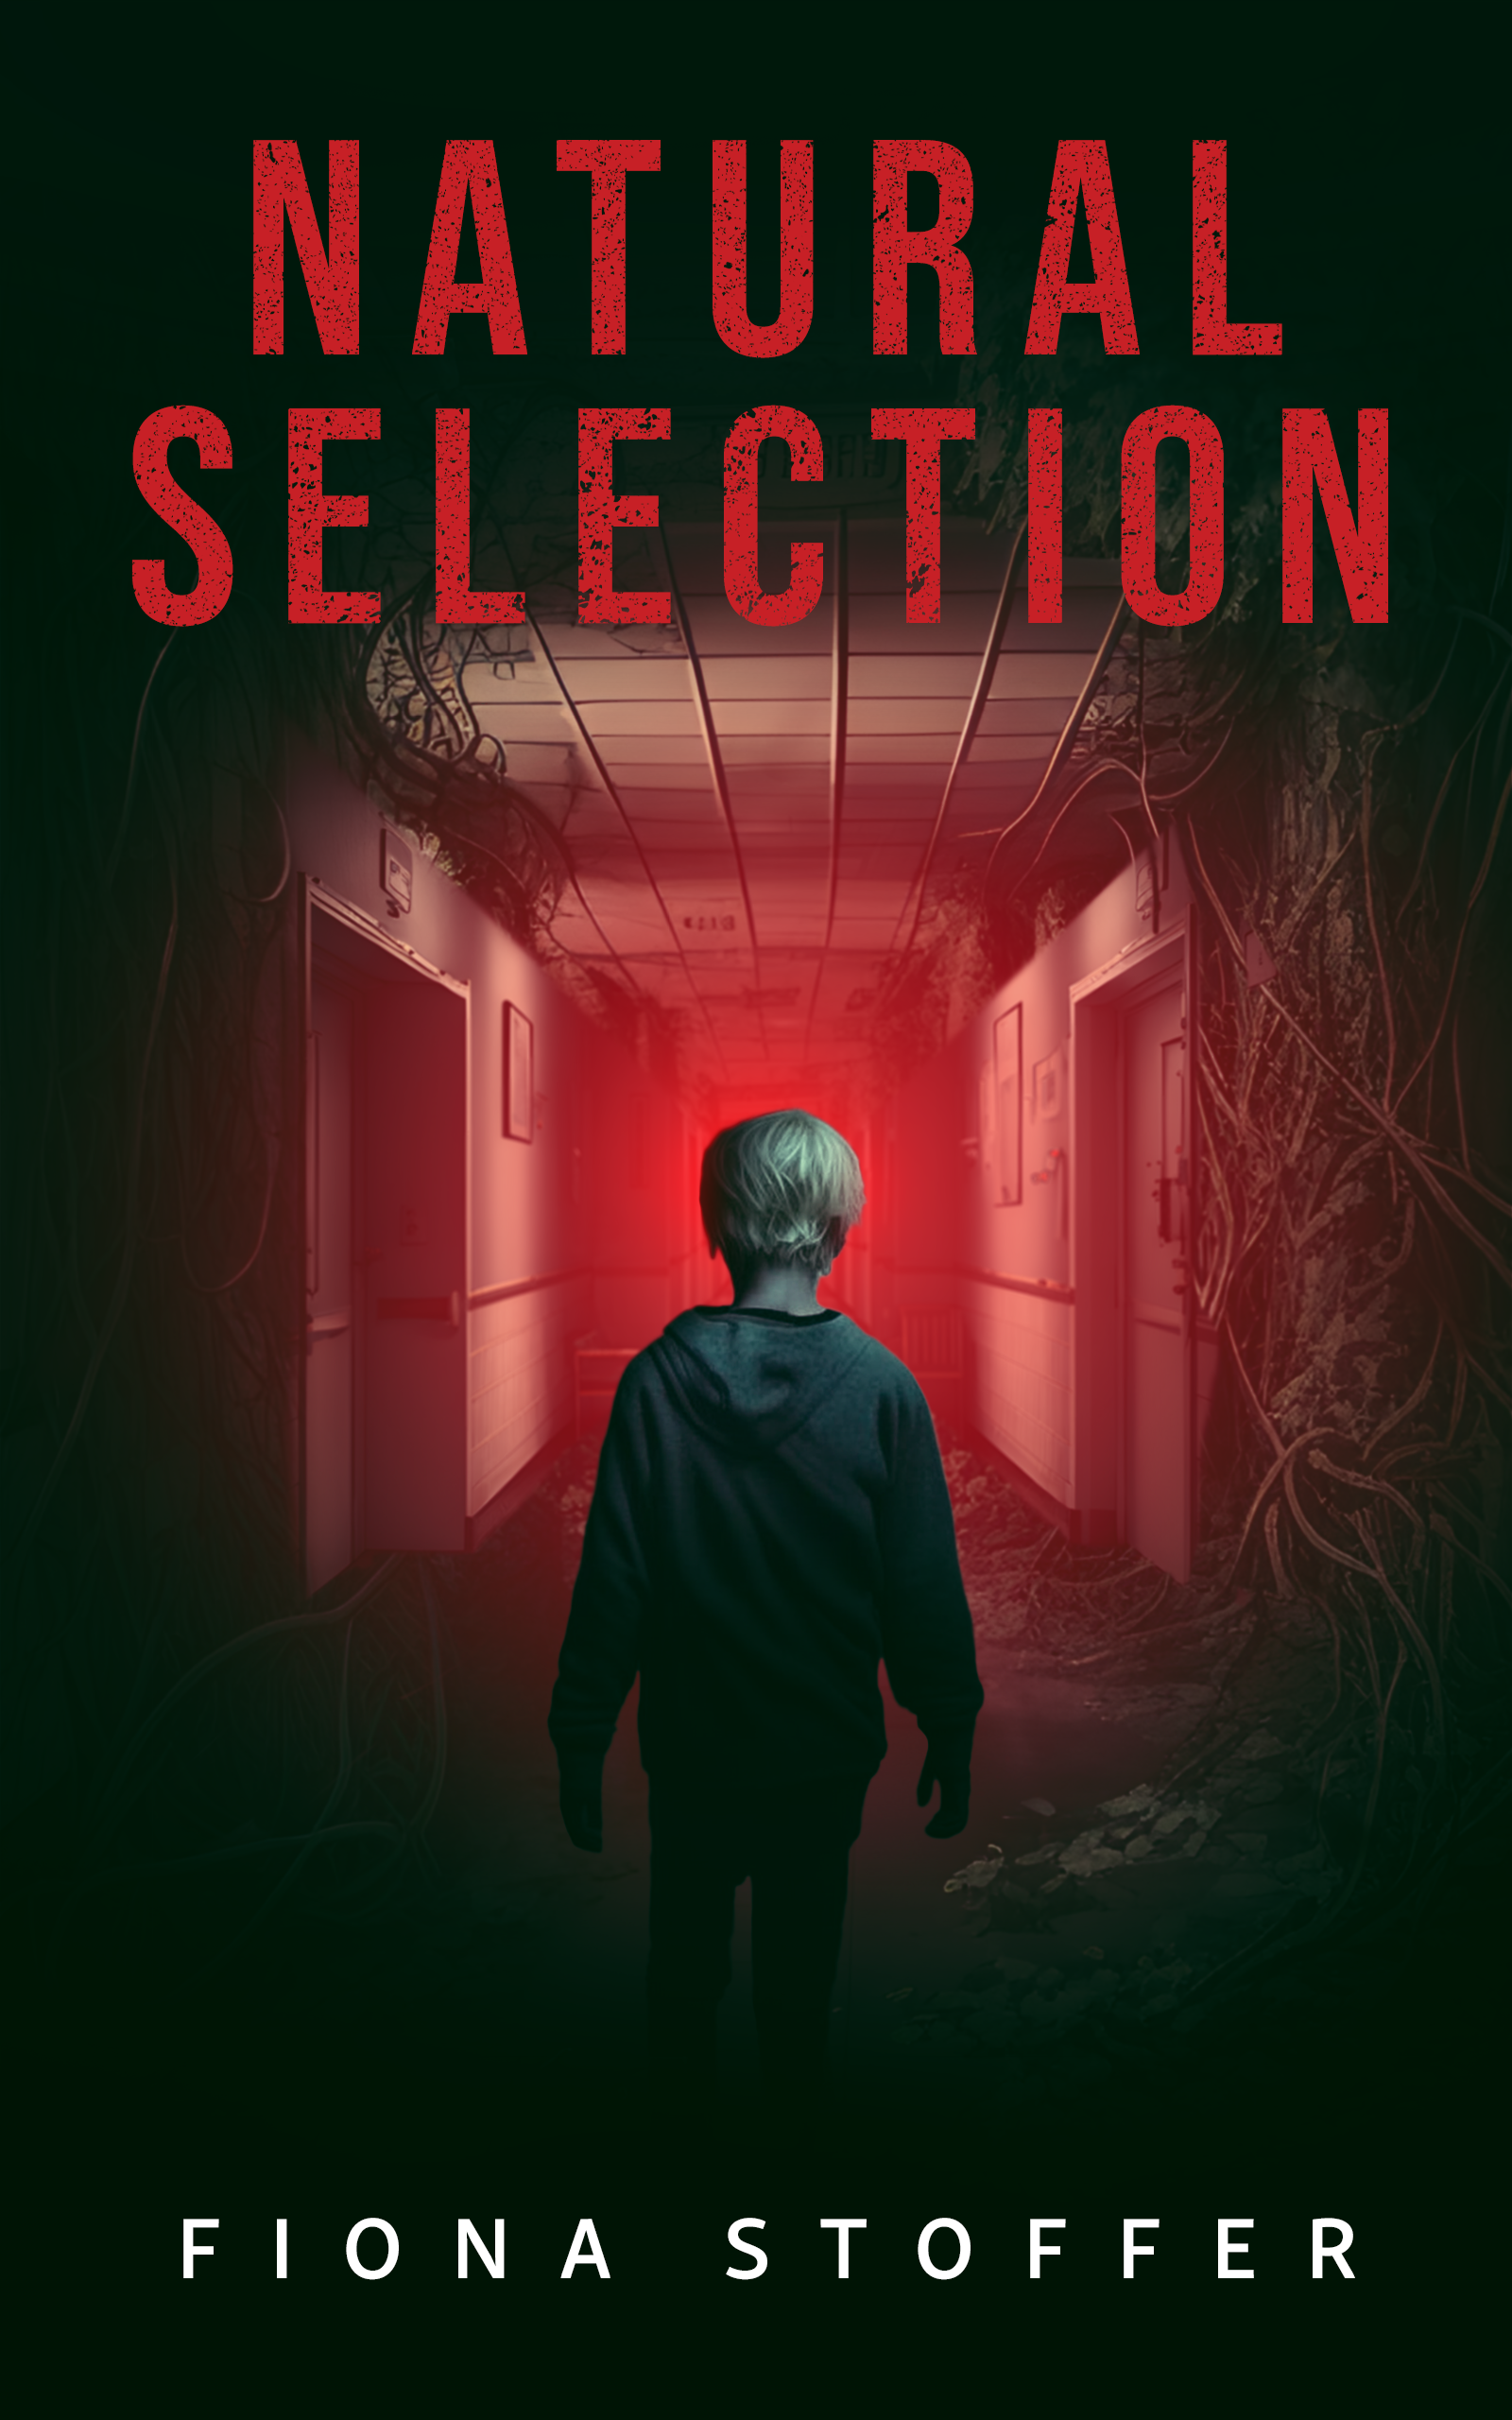 'Natural Selection' is a horror novel about an evil version of a children's book on environmental care coming to life in a nursing home.